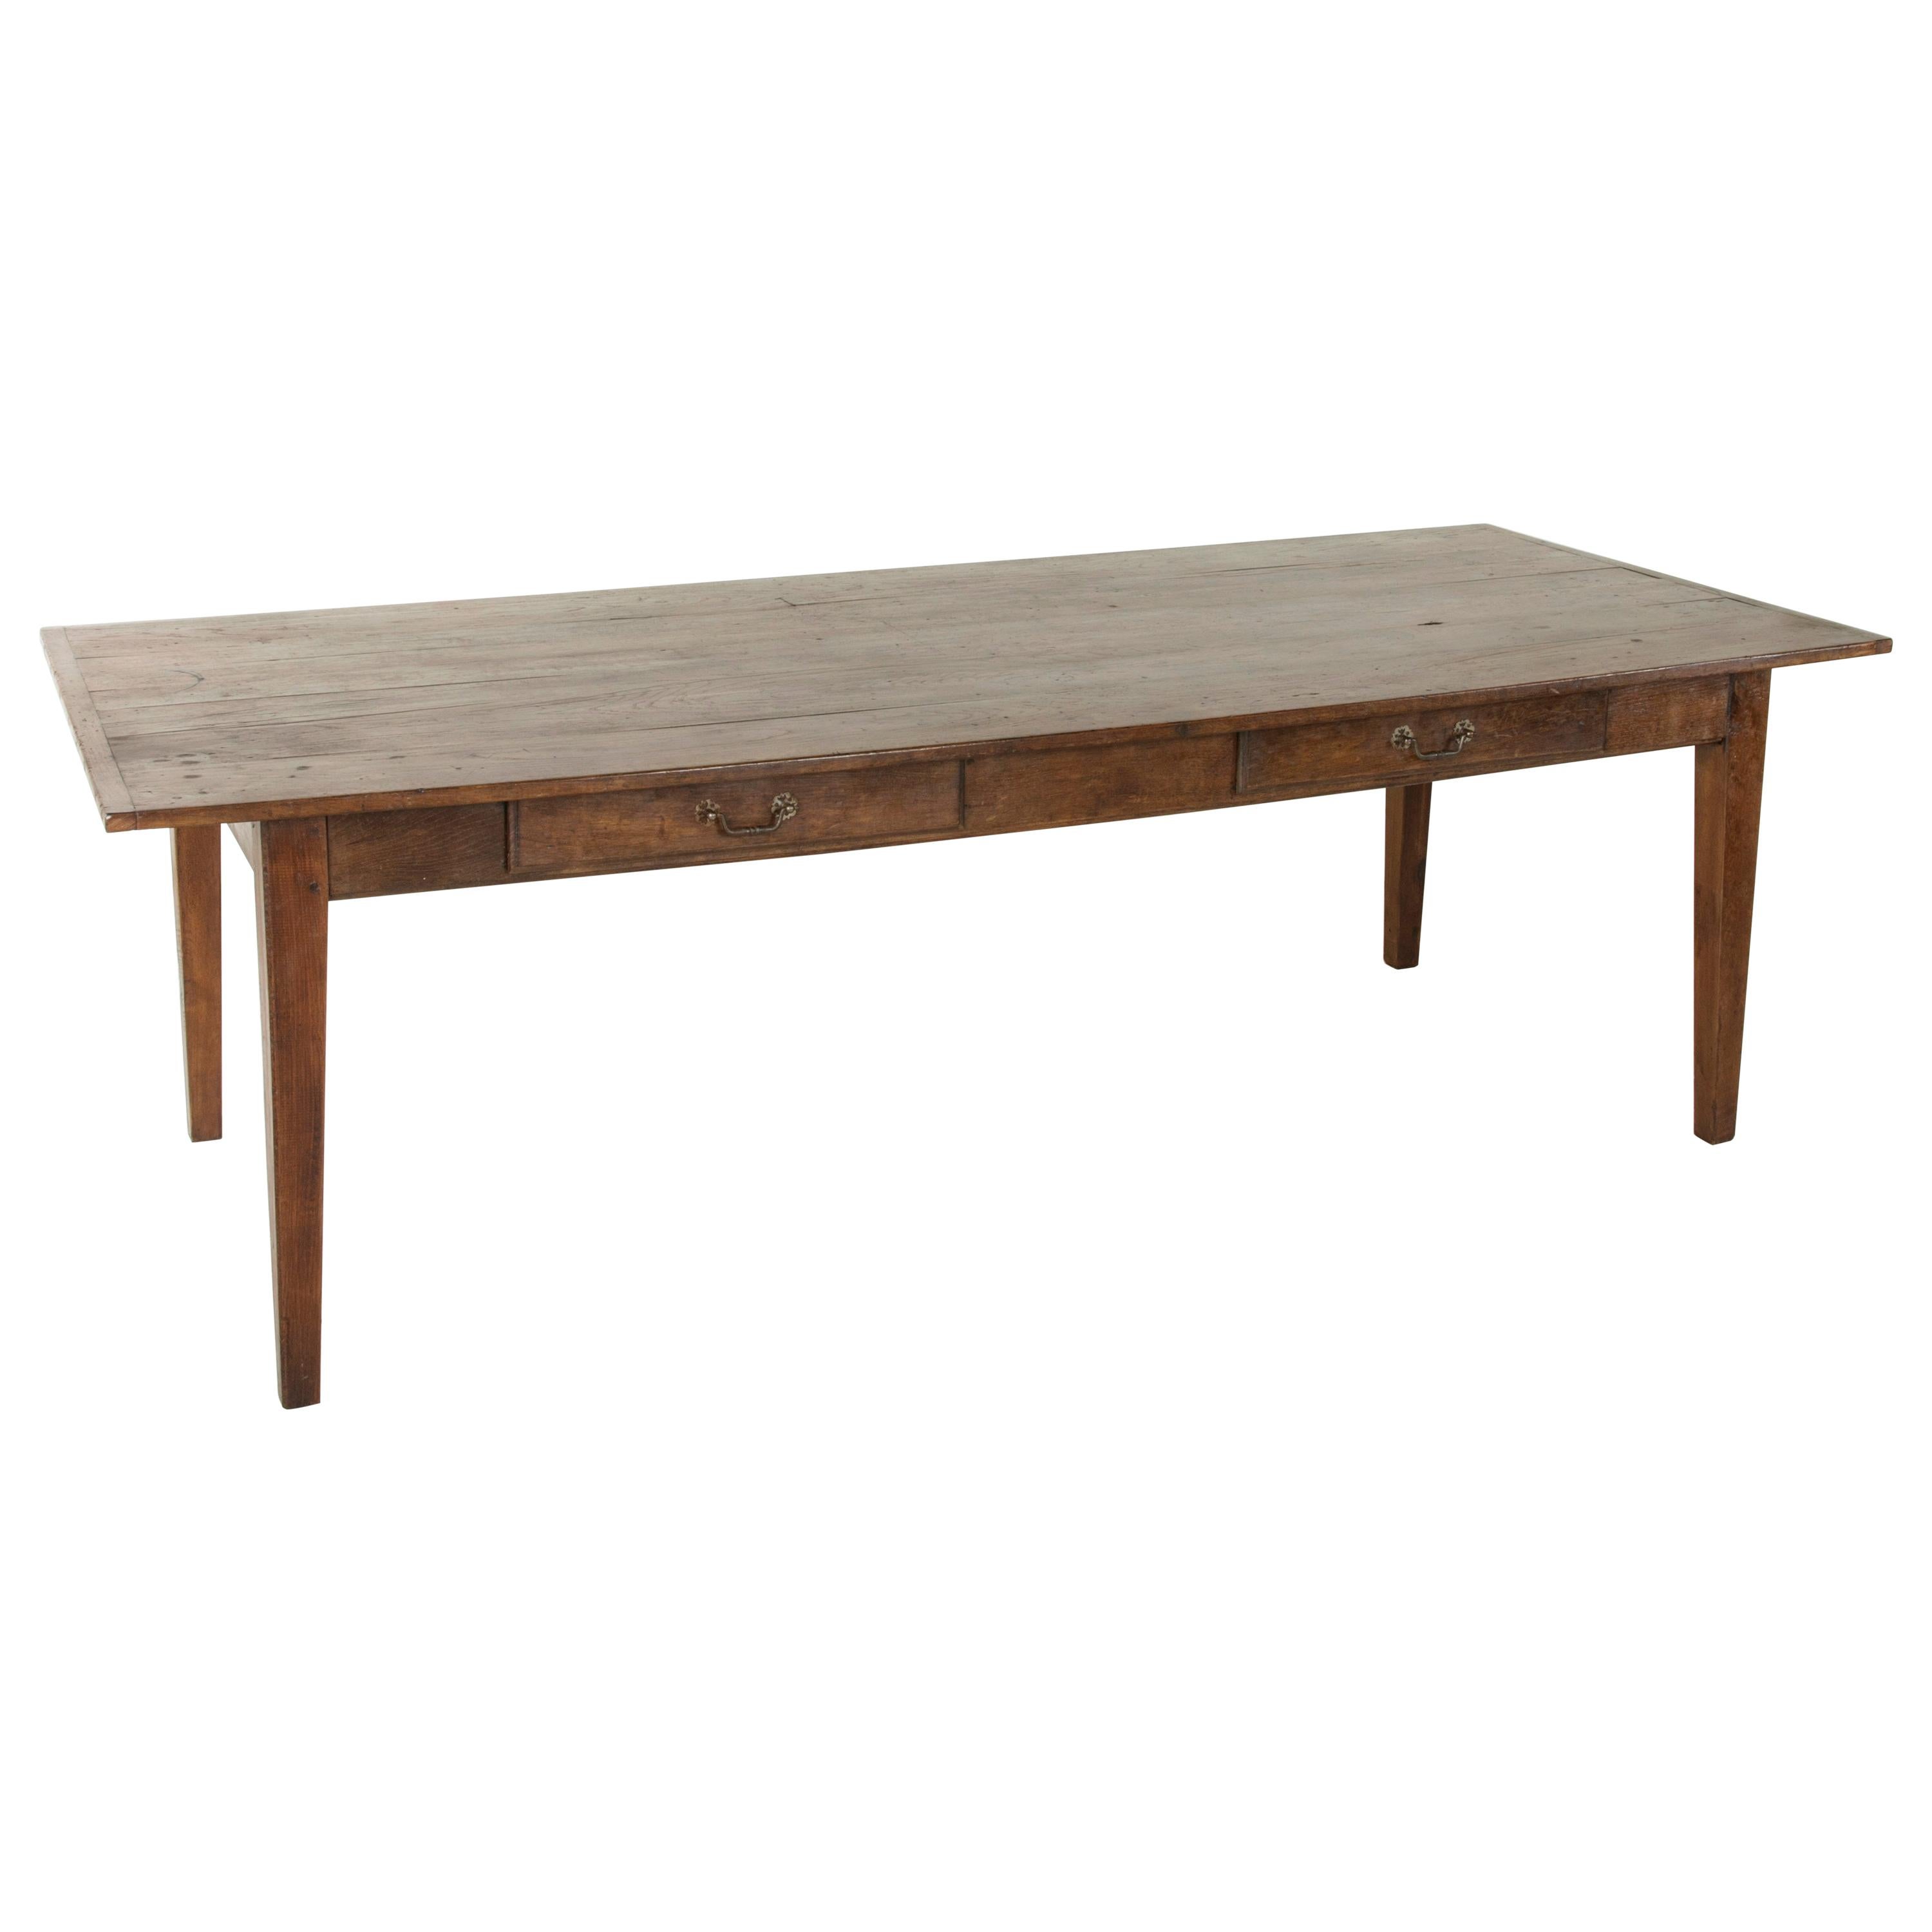 Long French Oak Farm Table or Dining Table with Two Drawers, circa 1900 